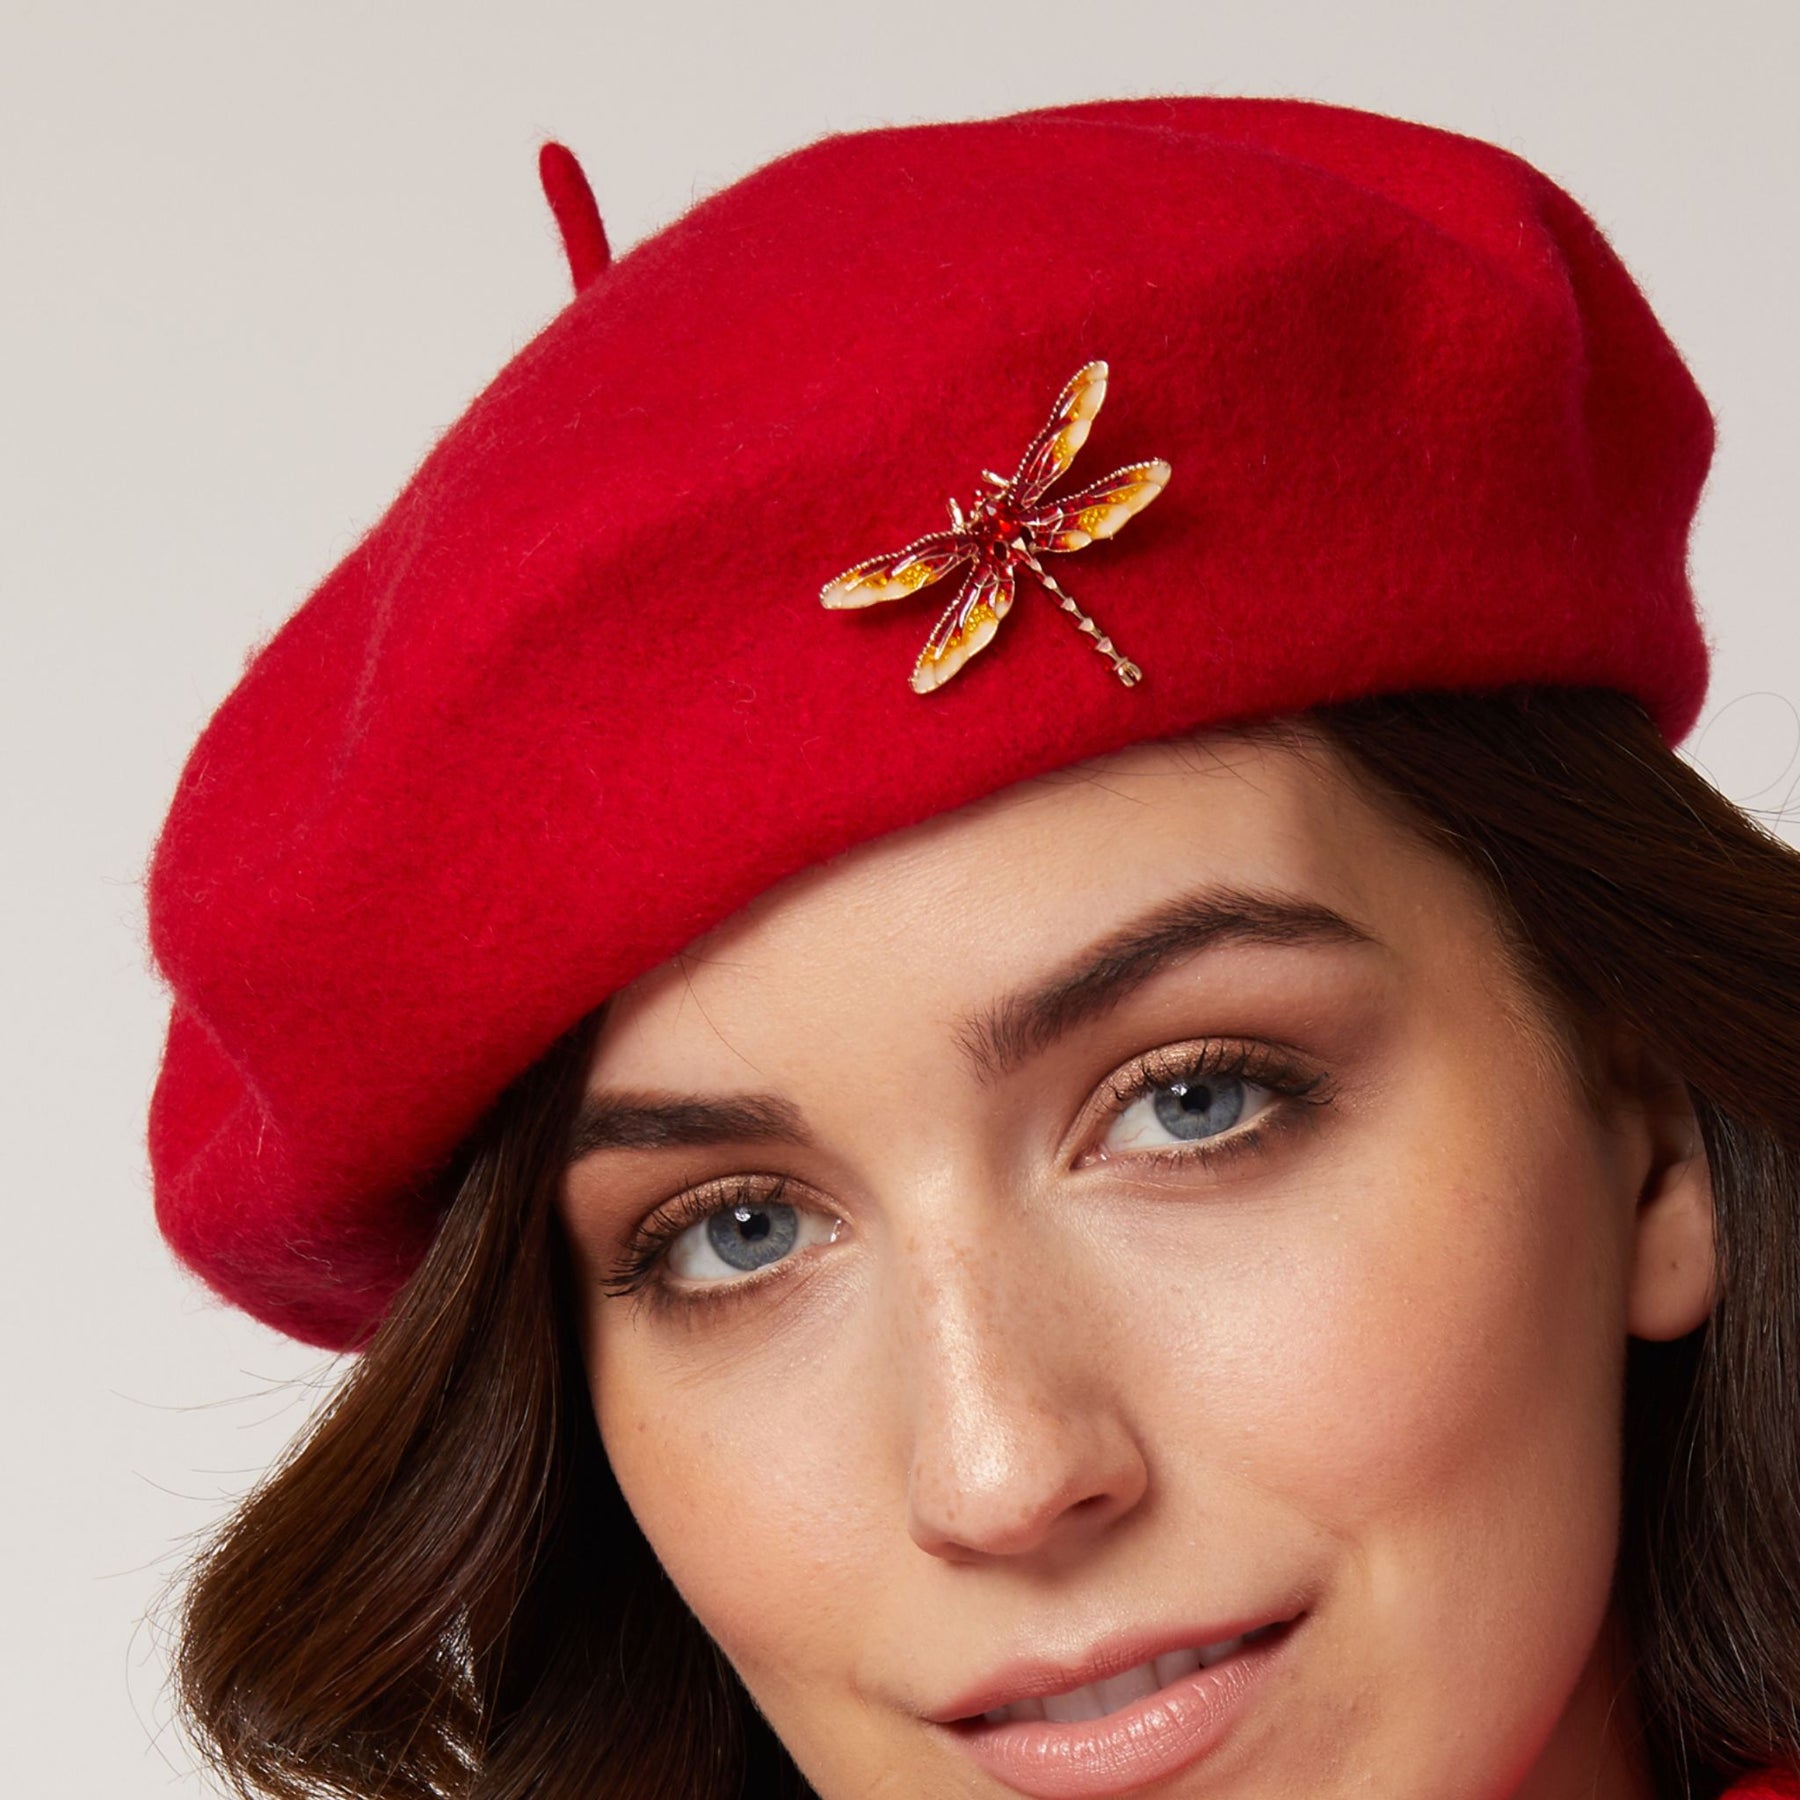 Red Beret with Dragonfly Brooch Red Hat Vintage Inspired